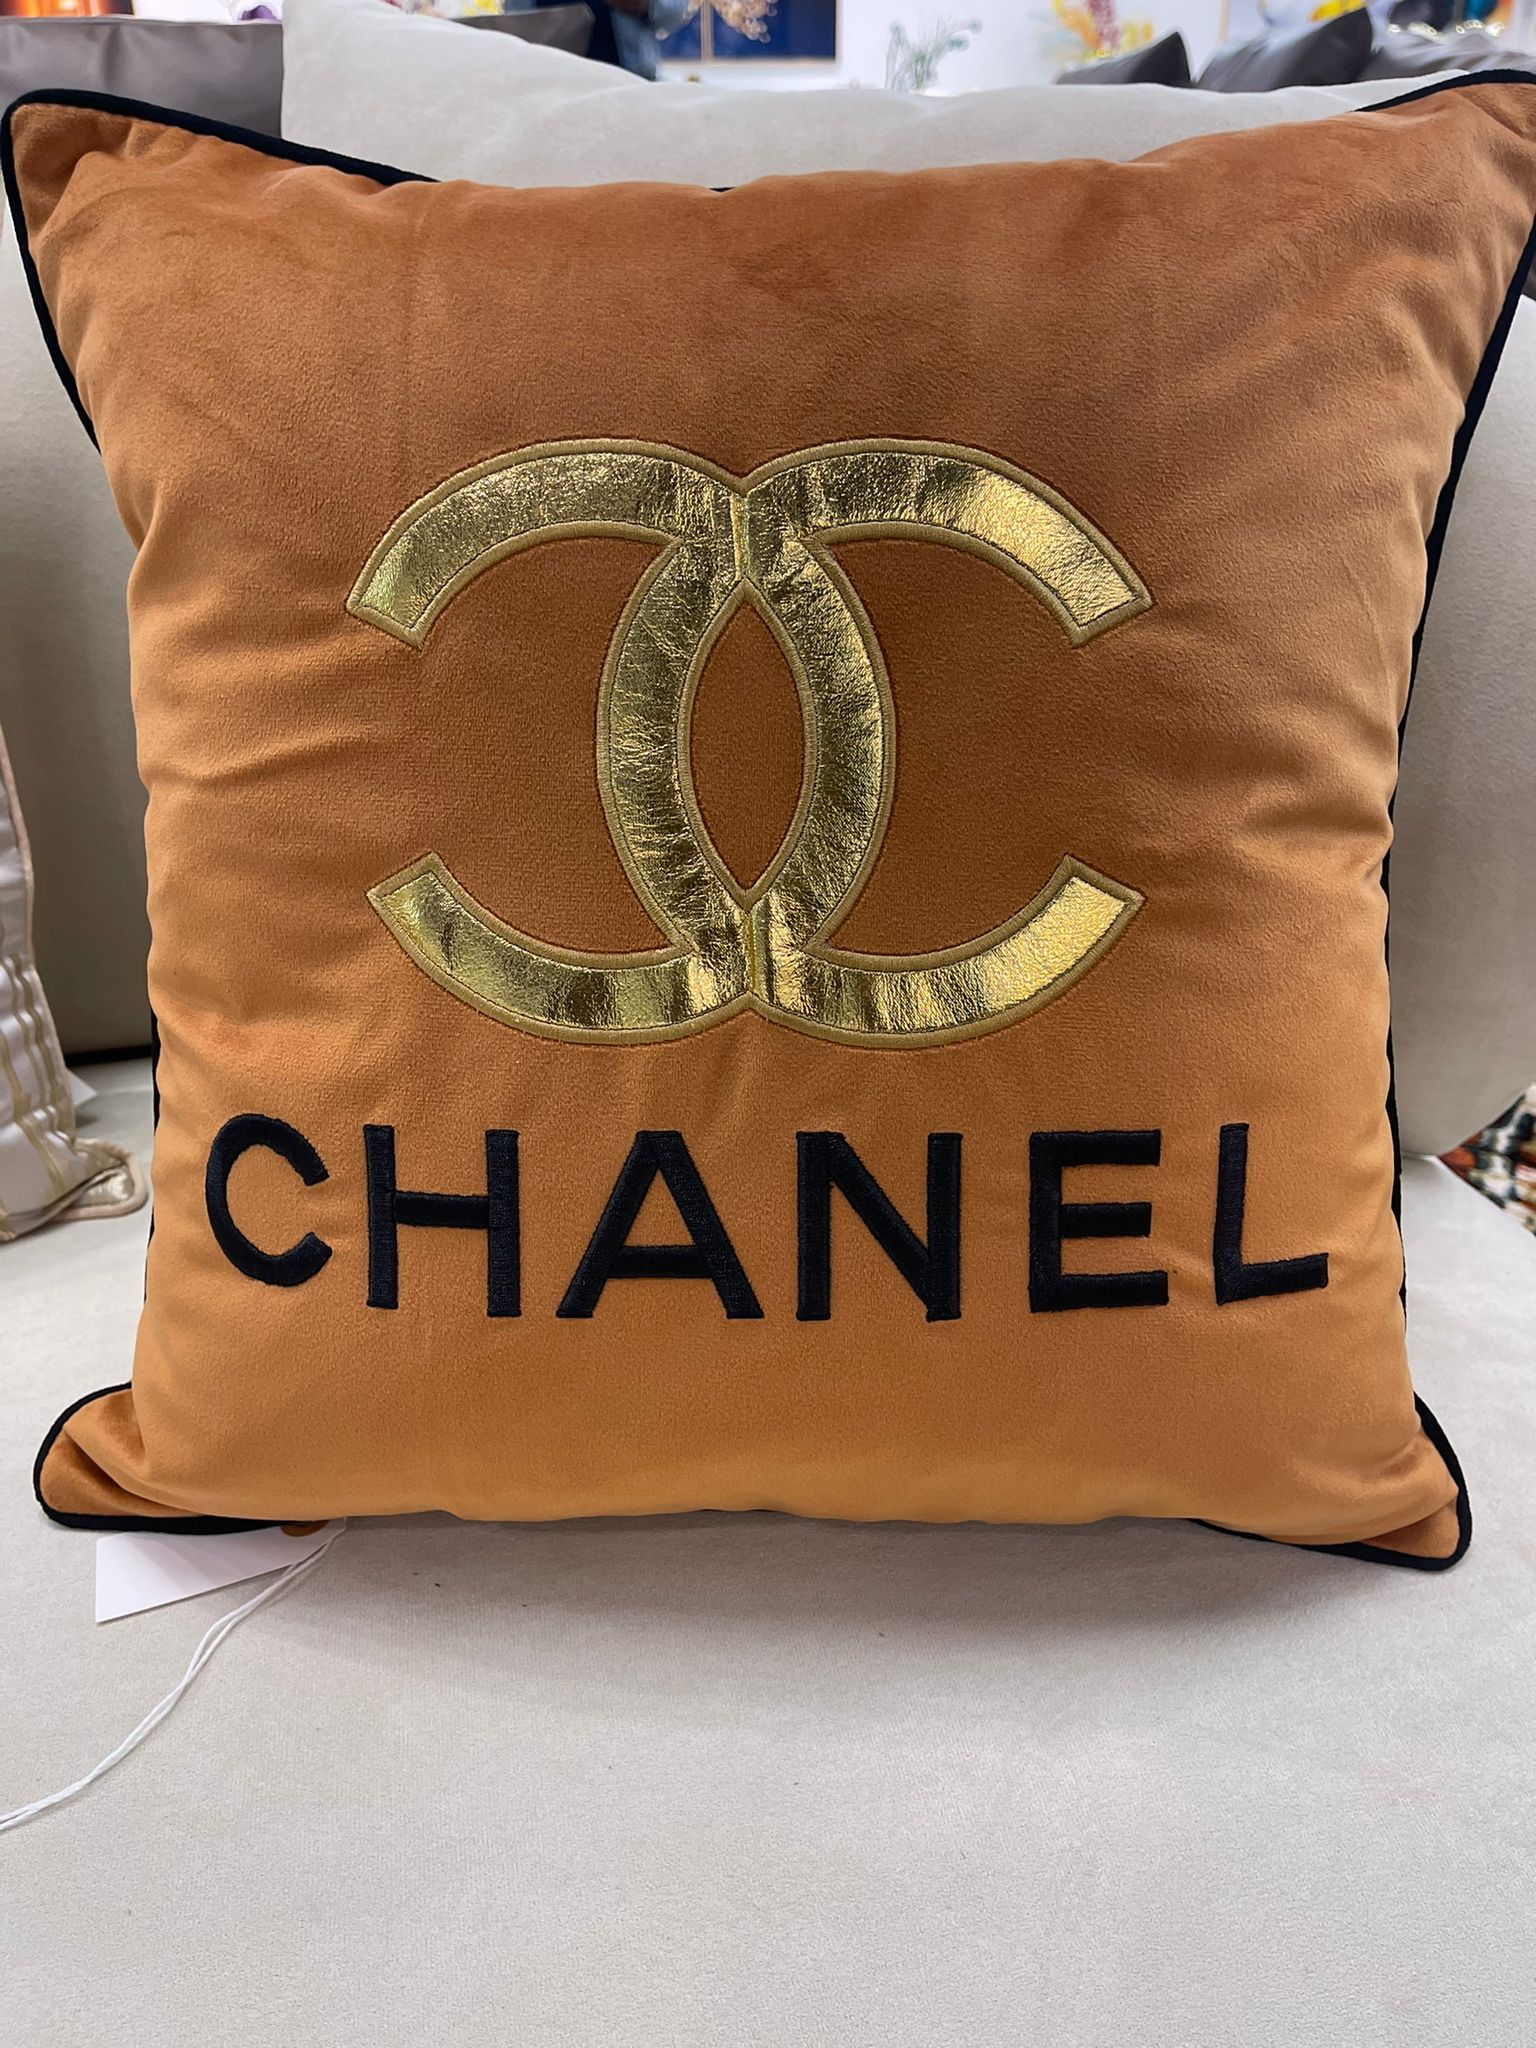 Chanel Throw Pillows for Sale - Fine Art America